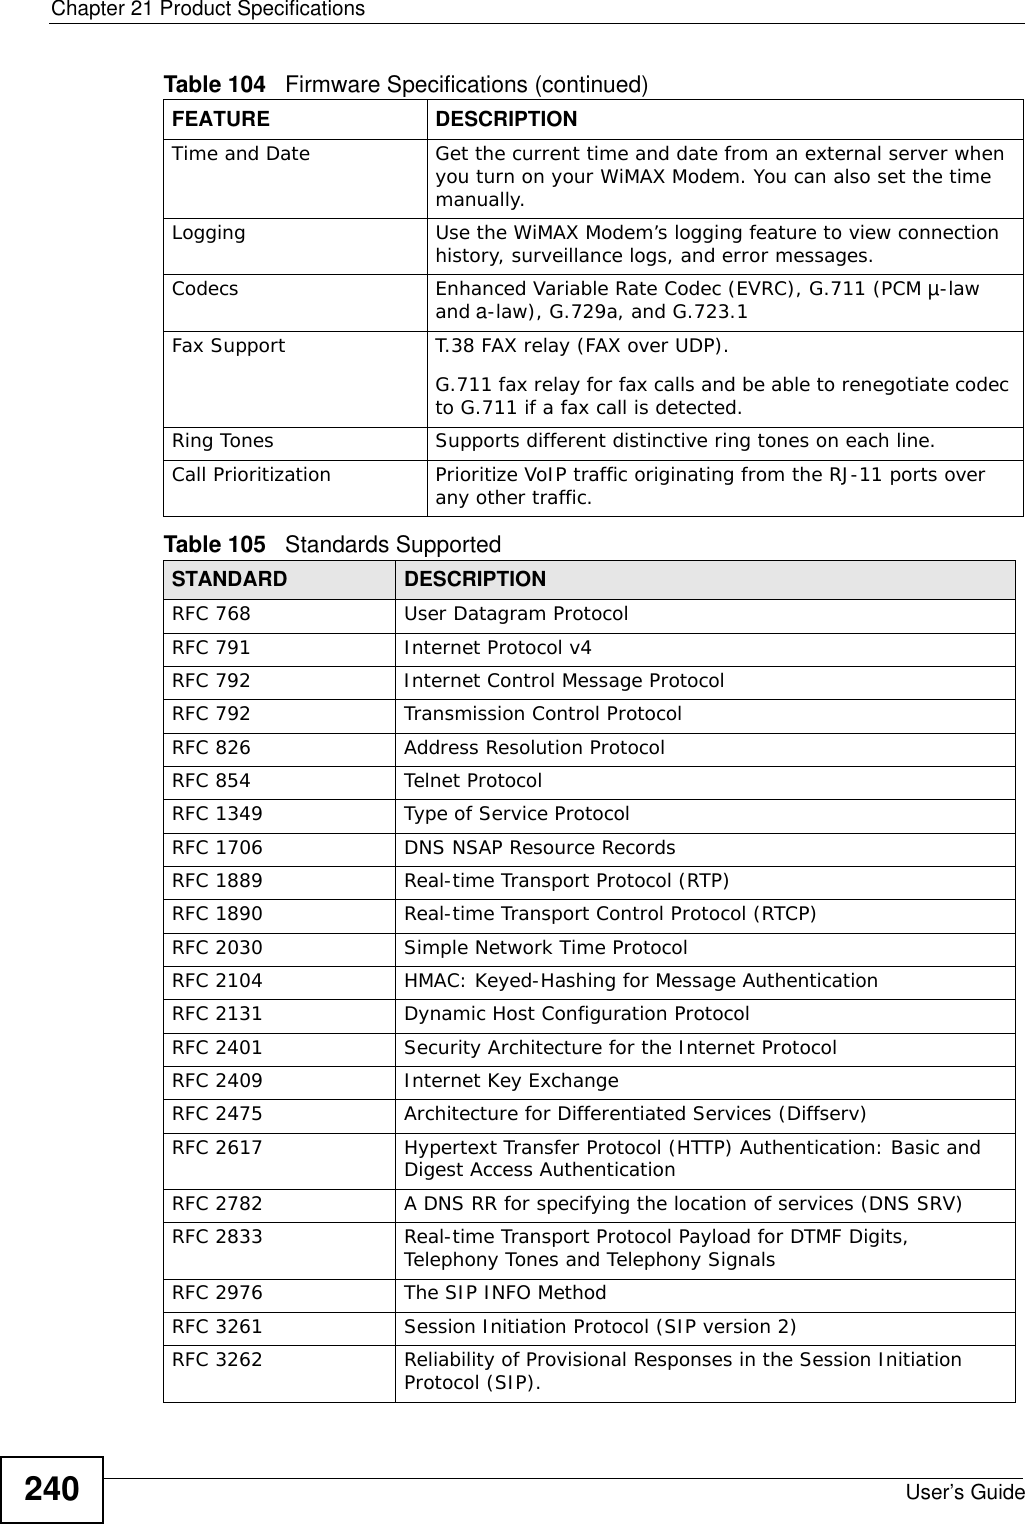 Chapter 21 Product SpecificationsUser’s Guide240Time and Date Get the current time and date from an external server when you turn on your WiMAX Modem. You can also set the time manually.Logging Use the WiMAX Modem’s logging feature to view connection history, surveillance logs, and error messages.Codecs Enhanced Variable Rate Codec (EVRC), G.711 (PCM µ-law and a-law), G.729a, and G.723.1 Fax Support T.38 FAX relay (FAX over UDP). G.711 fax relay for fax calls and be able to renegotiate codec to G.711 if a fax call is detected.Ring Tones Supports different distinctive ring tones on each line. Call Prioritization Prioritize VoIP traffic originating from the RJ-11 ports over any other traffic.Table 105   Standards Supported STANDARD DESCRIPTIONRFC 768 User Datagram ProtocolRFC 791 Internet Protocol v4RFC 792 Internet Control Message ProtocolRFC 792 Transmission Control ProtocolRFC 826 Address Resolution ProtocolRFC 854 Telnet ProtocolRFC 1349 Type of Service ProtocolRFC 1706 DNS NSAP Resource RecordsRFC 1889 Real-time Transport Protocol (RTP)RFC 1890 Real-time Transport Control Protocol (RTCP)RFC 2030 Simple Network Time ProtocolRFC 2104 HMAC: Keyed-Hashing for Message AuthenticationRFC 2131 Dynamic Host Configuration ProtocolRFC 2401 Security Architecture for the Internet ProtocolRFC 2409 Internet Key ExchangeRFC 2475 Architecture for Differentiated Services (Diffserv)RFC 2617 Hypertext Transfer Protocol (HTTP) Authentication: Basic and Digest Access Authentication RFC 2782 A DNS RR for specifying the location of services (DNS SRV)RFC 2833 Real-time Transport Protocol Payload for DTMF Digits, Telephony Tones and Telephony SignalsRFC 2976 The SIP INFO MethodRFC 3261 Session Initiation Protocol (SIP version 2)RFC 3262 Reliability of Provisional Responses in the Session Initiation Protocol (SIP).Table 104   Firmware Specifications (continued)FEATURE DESCRIPTION